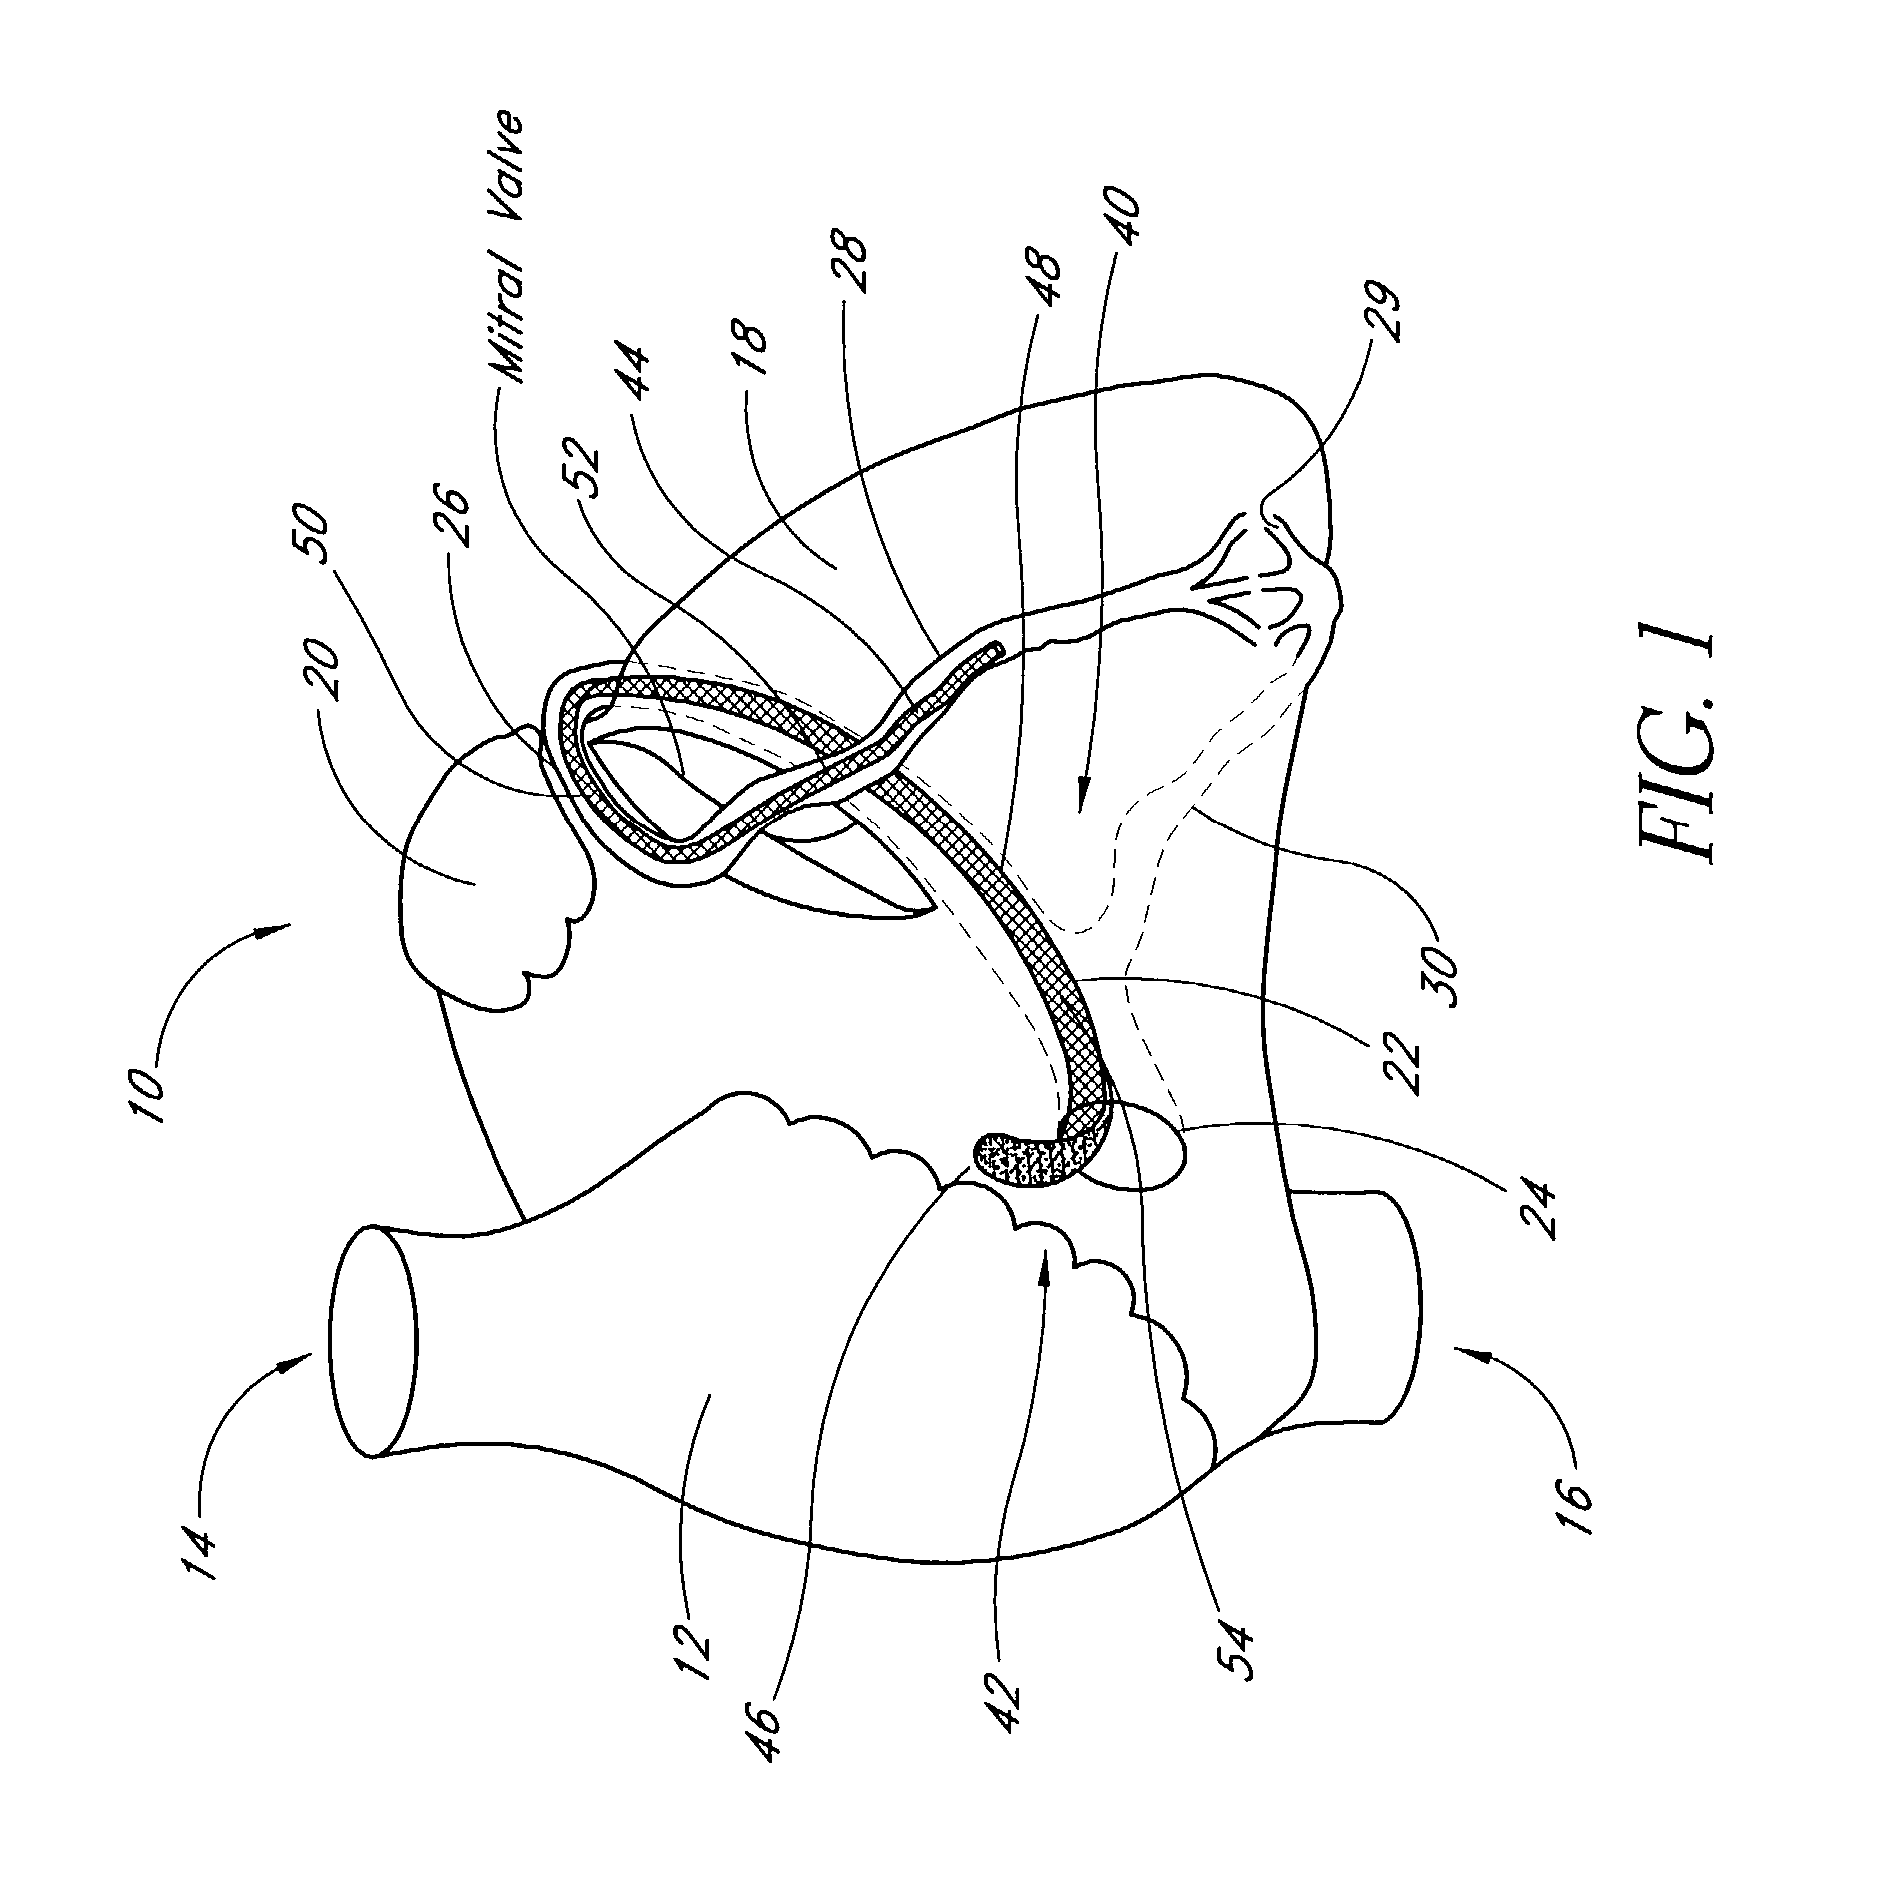 Medical system and method for remodeling an extravascular tissue structure